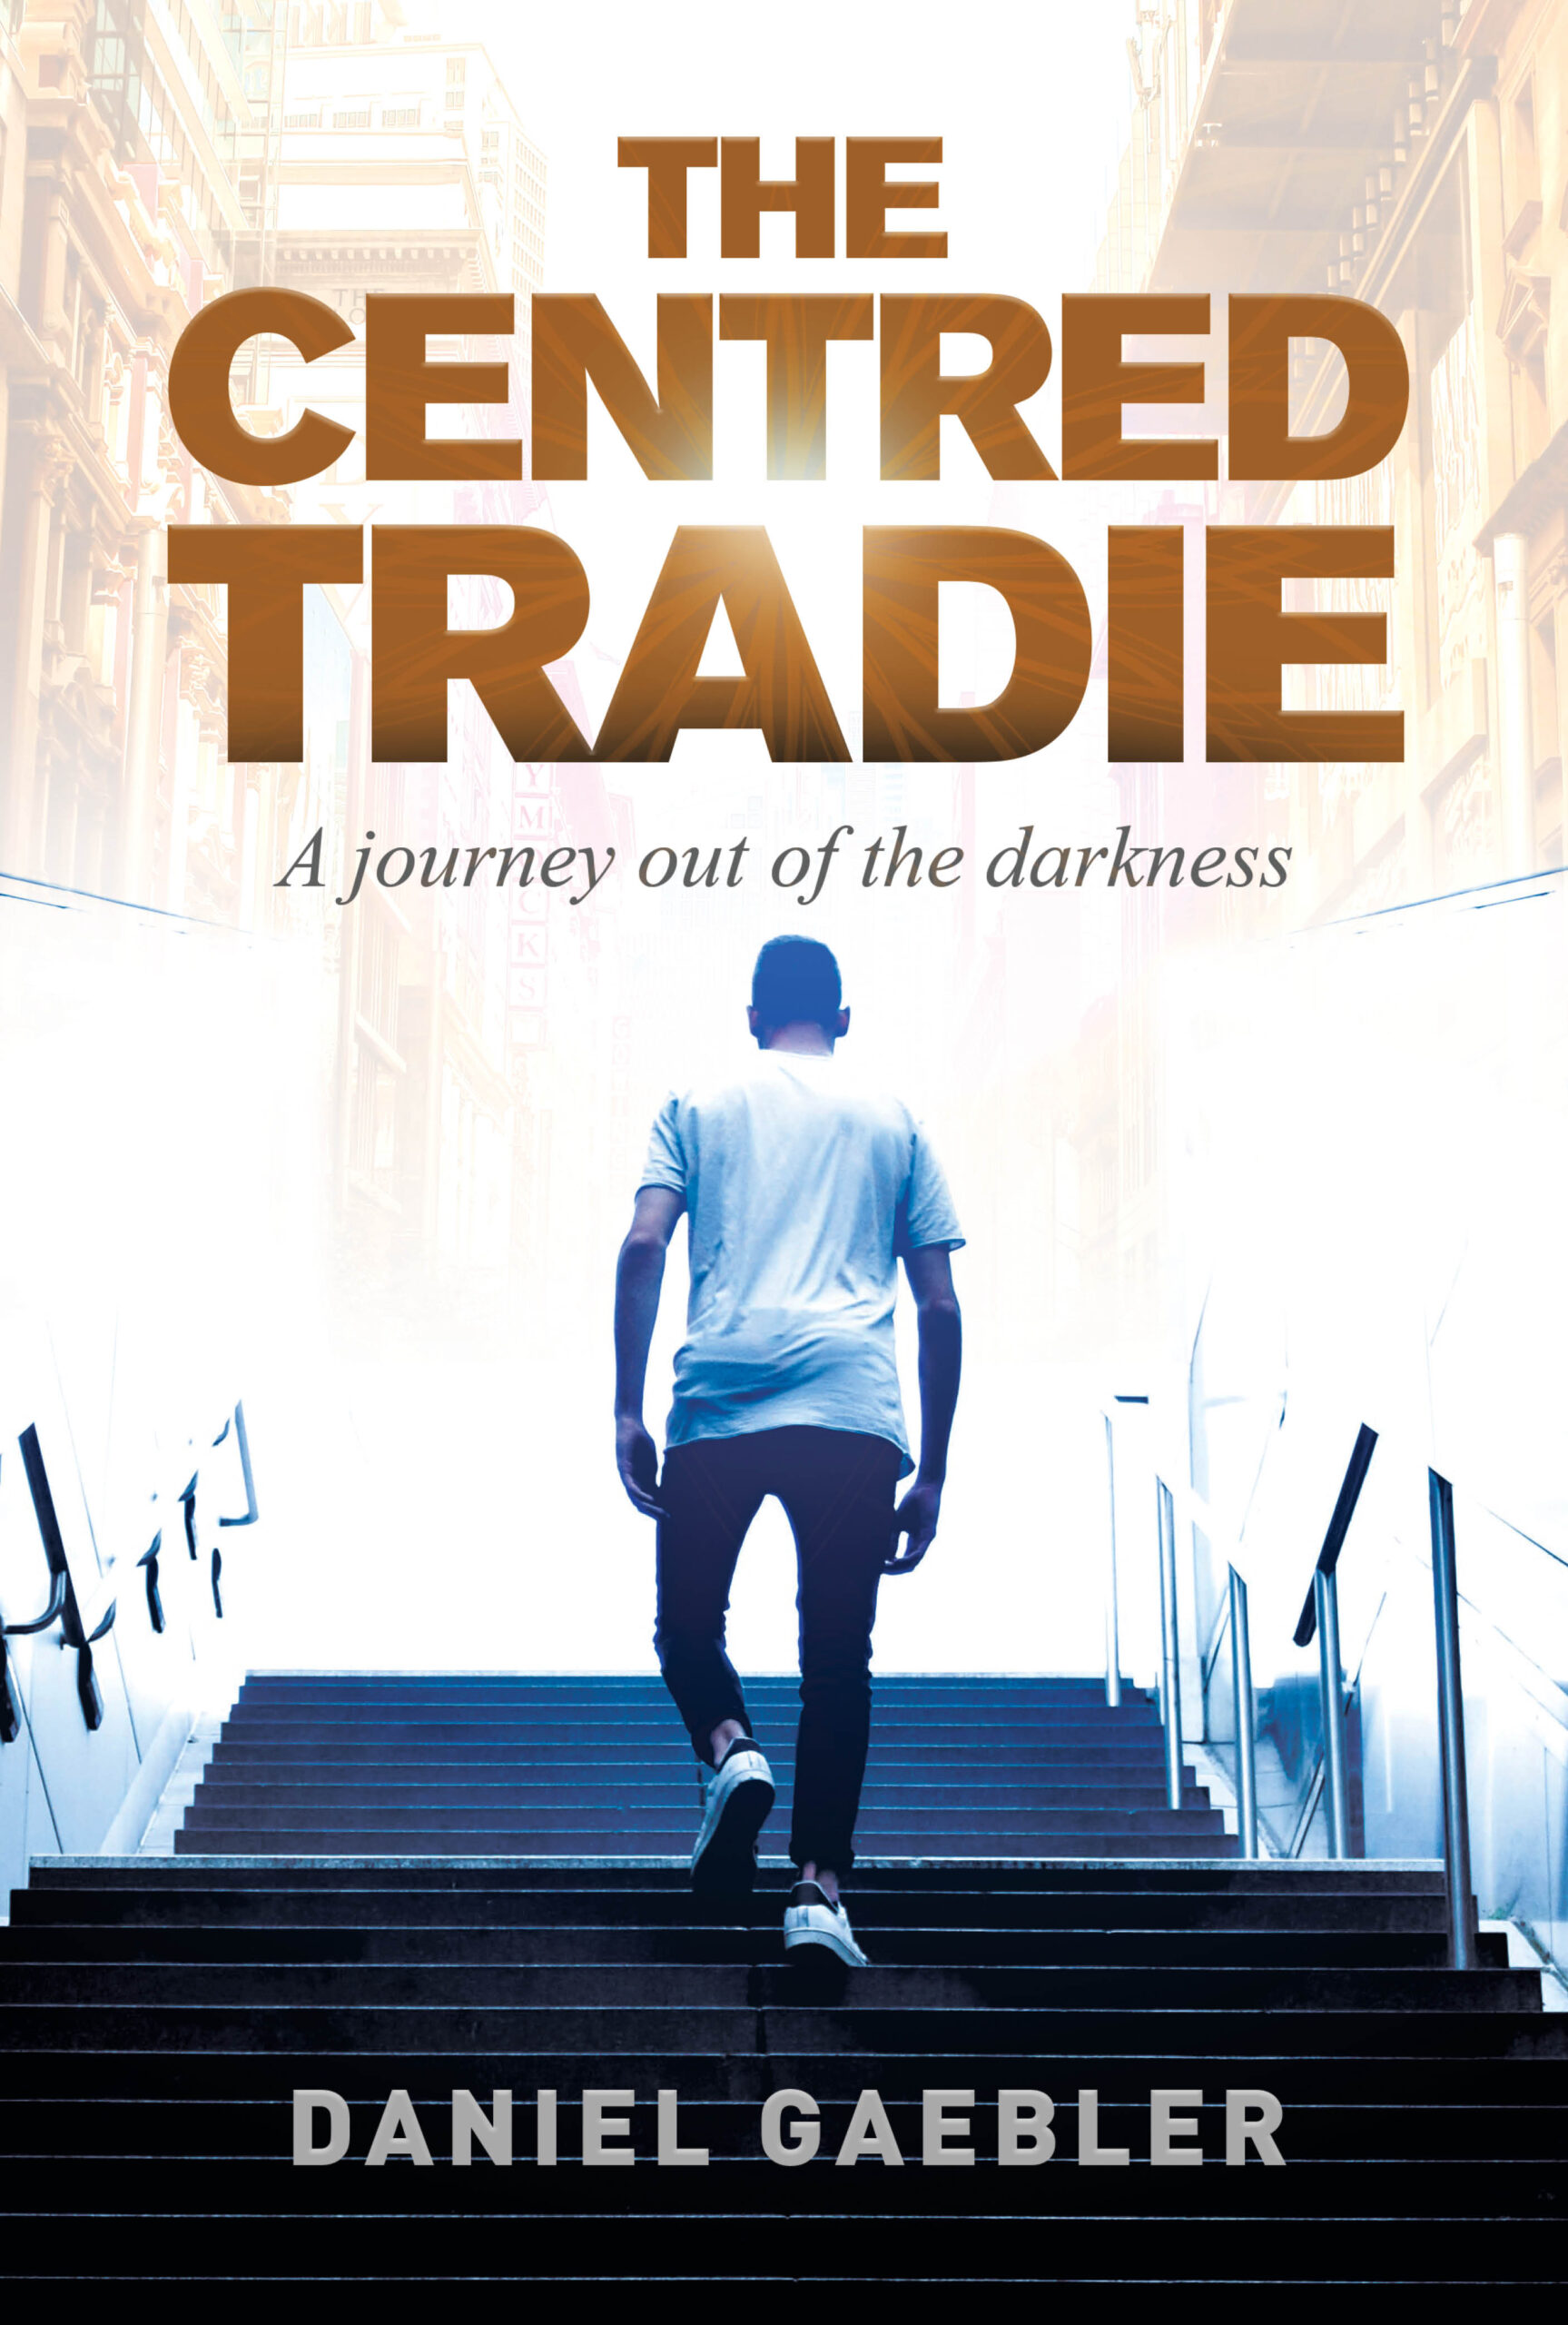 THE CENTRED TRADIE